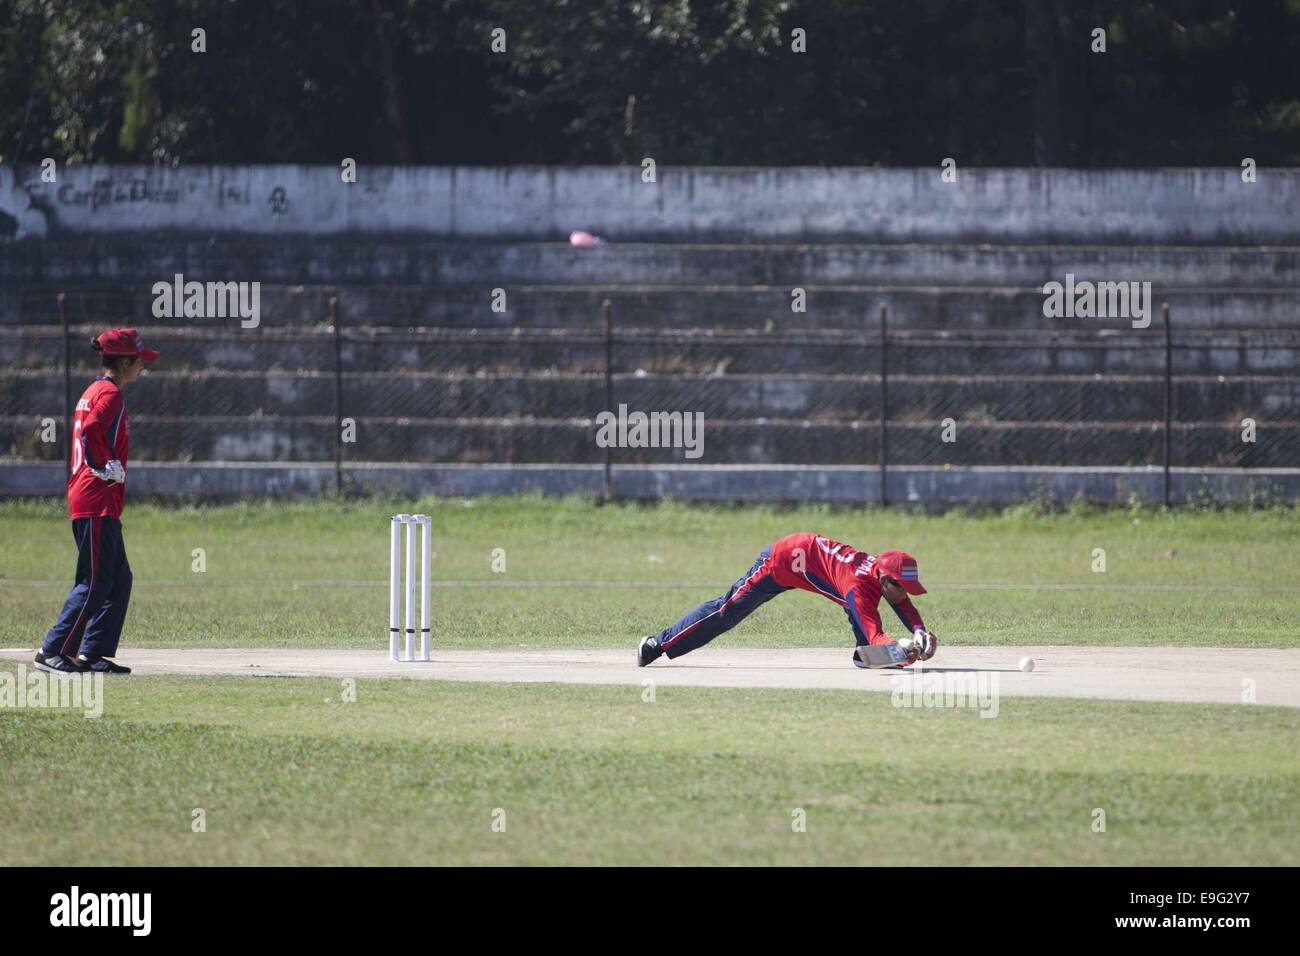 Lalitpur, Nepal. 27th Oct, 2014. Visually impaired Nepali women cricketers compete during a match of International Blind Women Cricket Tournament in Lalitpur, Oct. 27, 2014. Credit:  Pratap Thapa/Xinhua/Alamy Live News Stock Photo